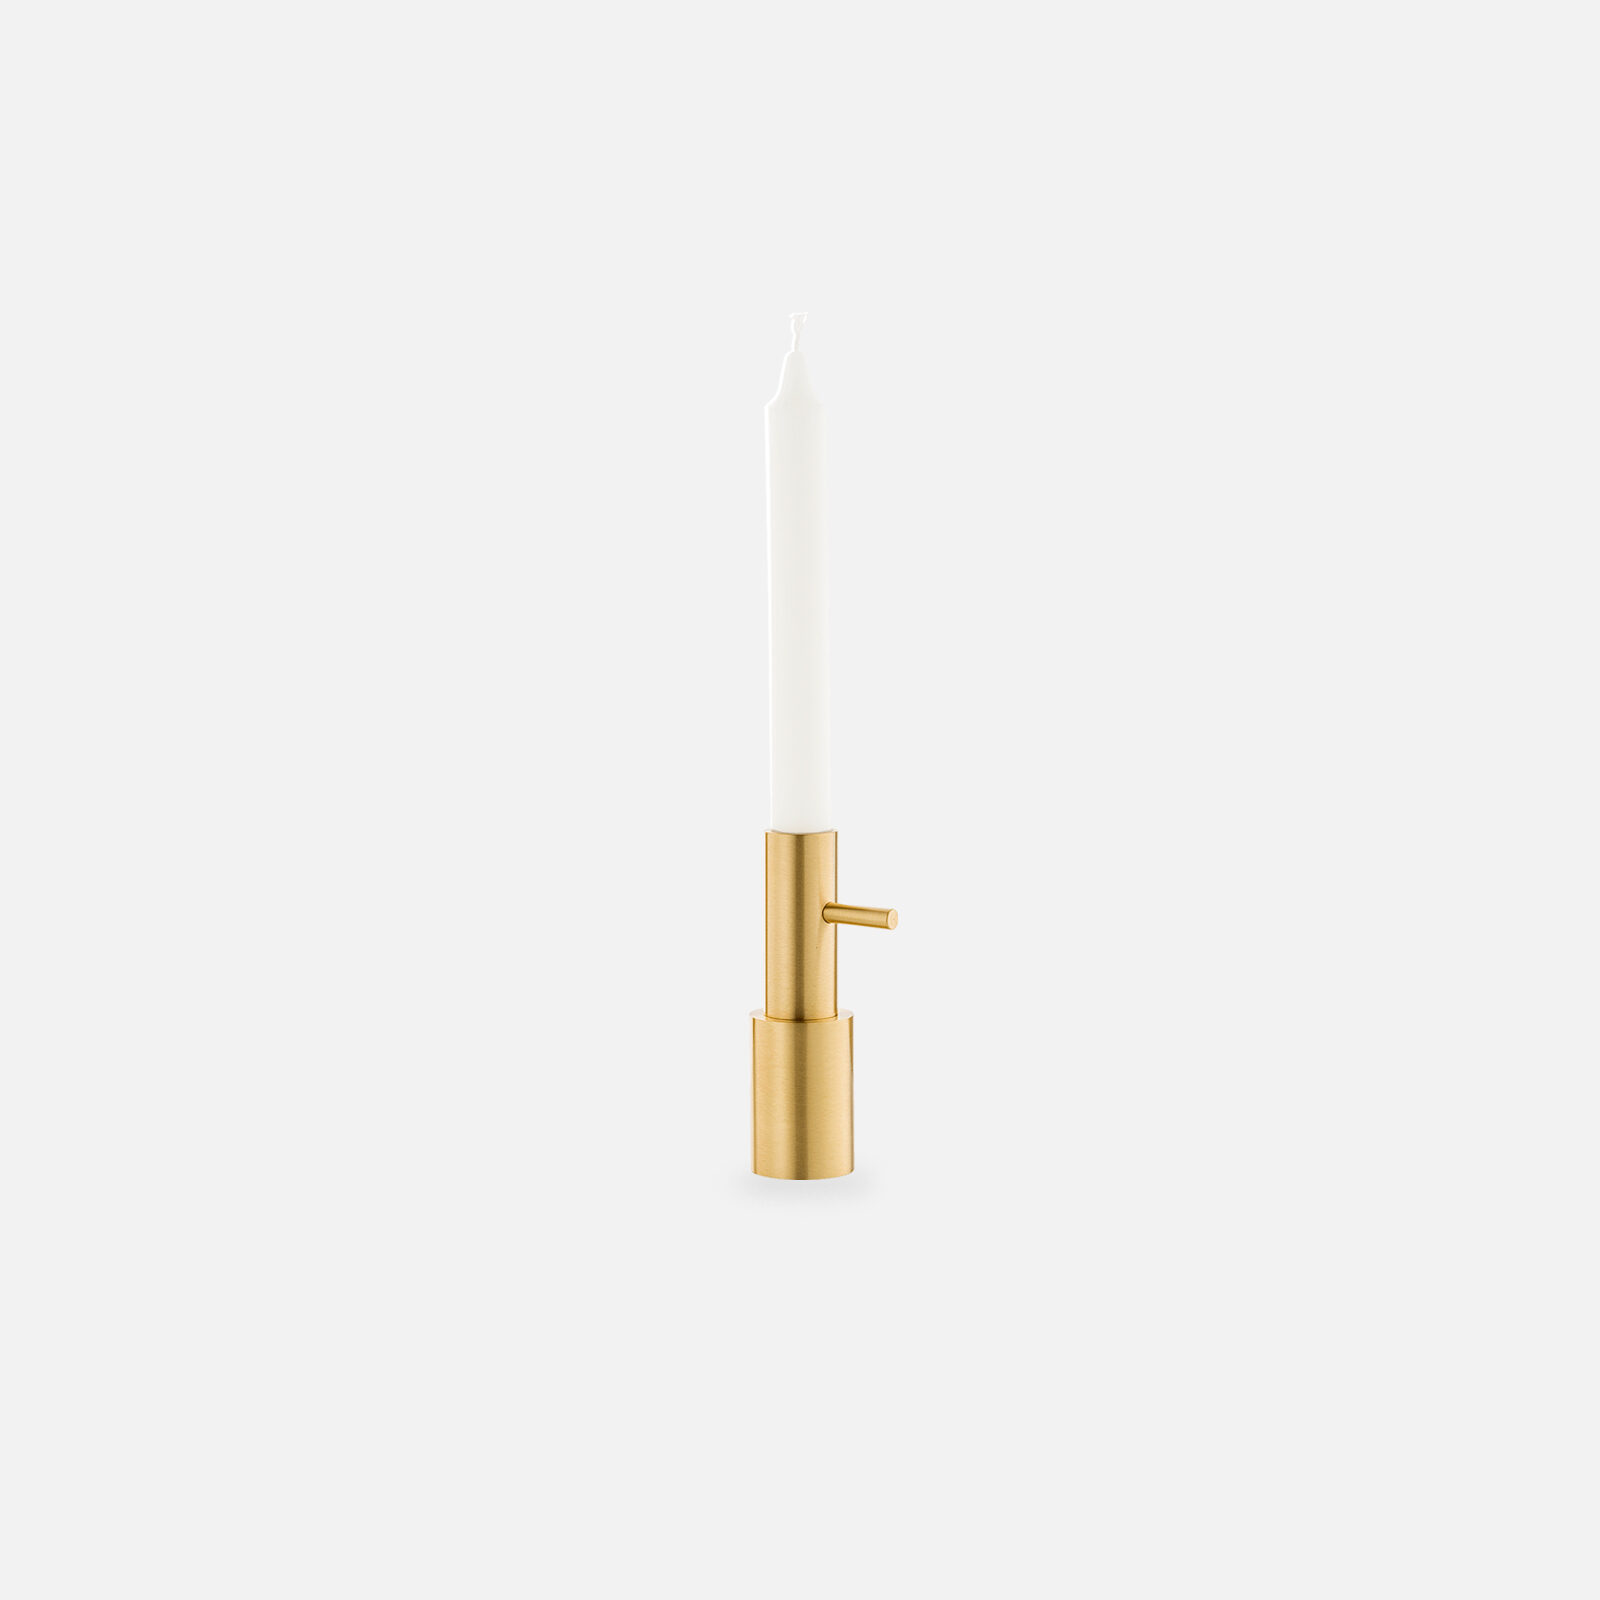 Candleholder #2 Lacquered Solid Brass